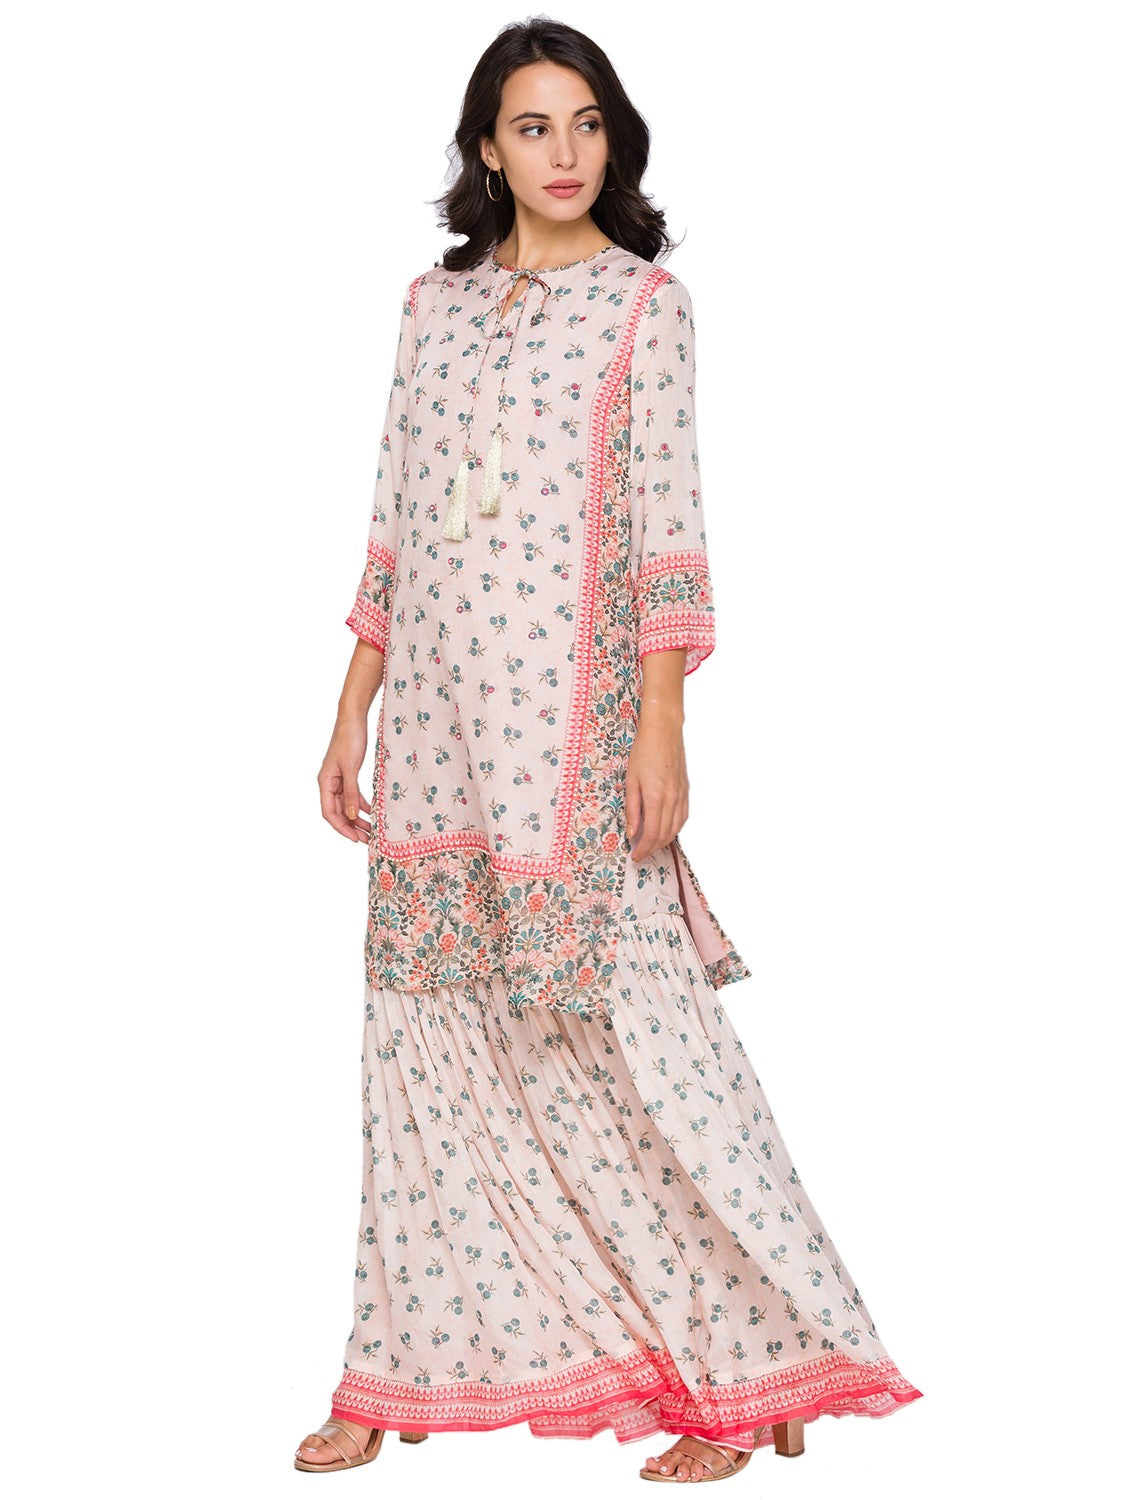 sougat paul Printed top paired with printed sharara pants pink festive fusion online shopping melange singapore indian designer wear